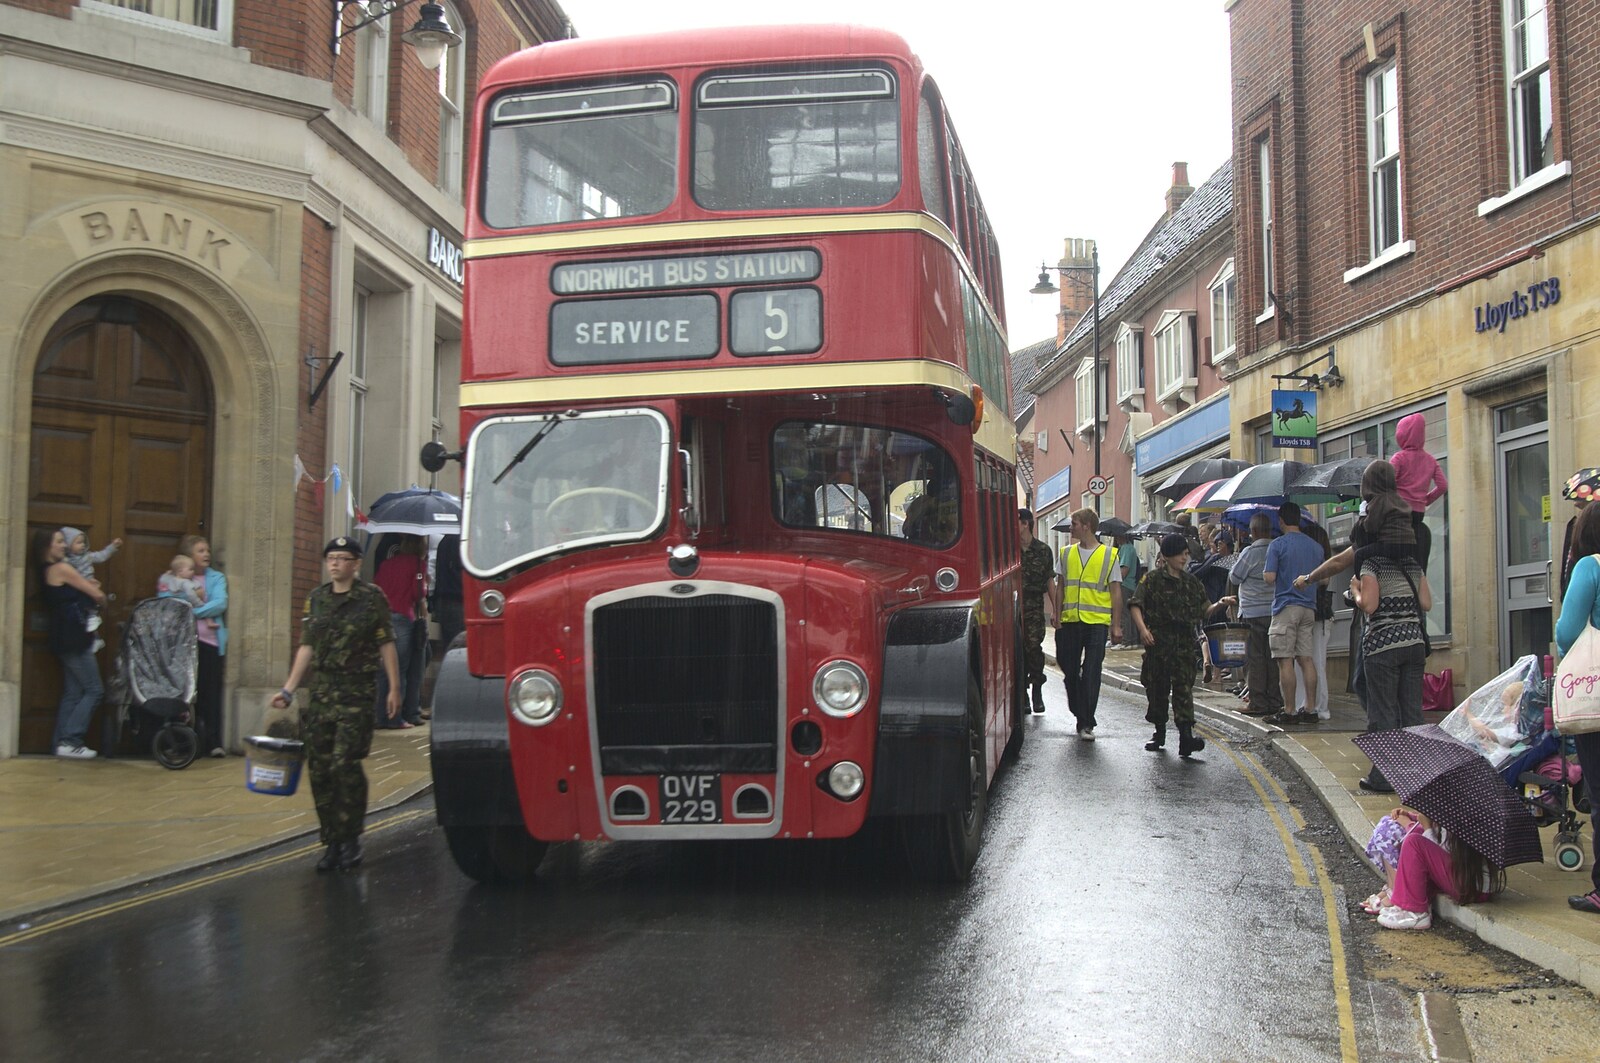 A London Routemaster bus from Diss Carnival Procession, Diss, Norfolk - 21st June 2009